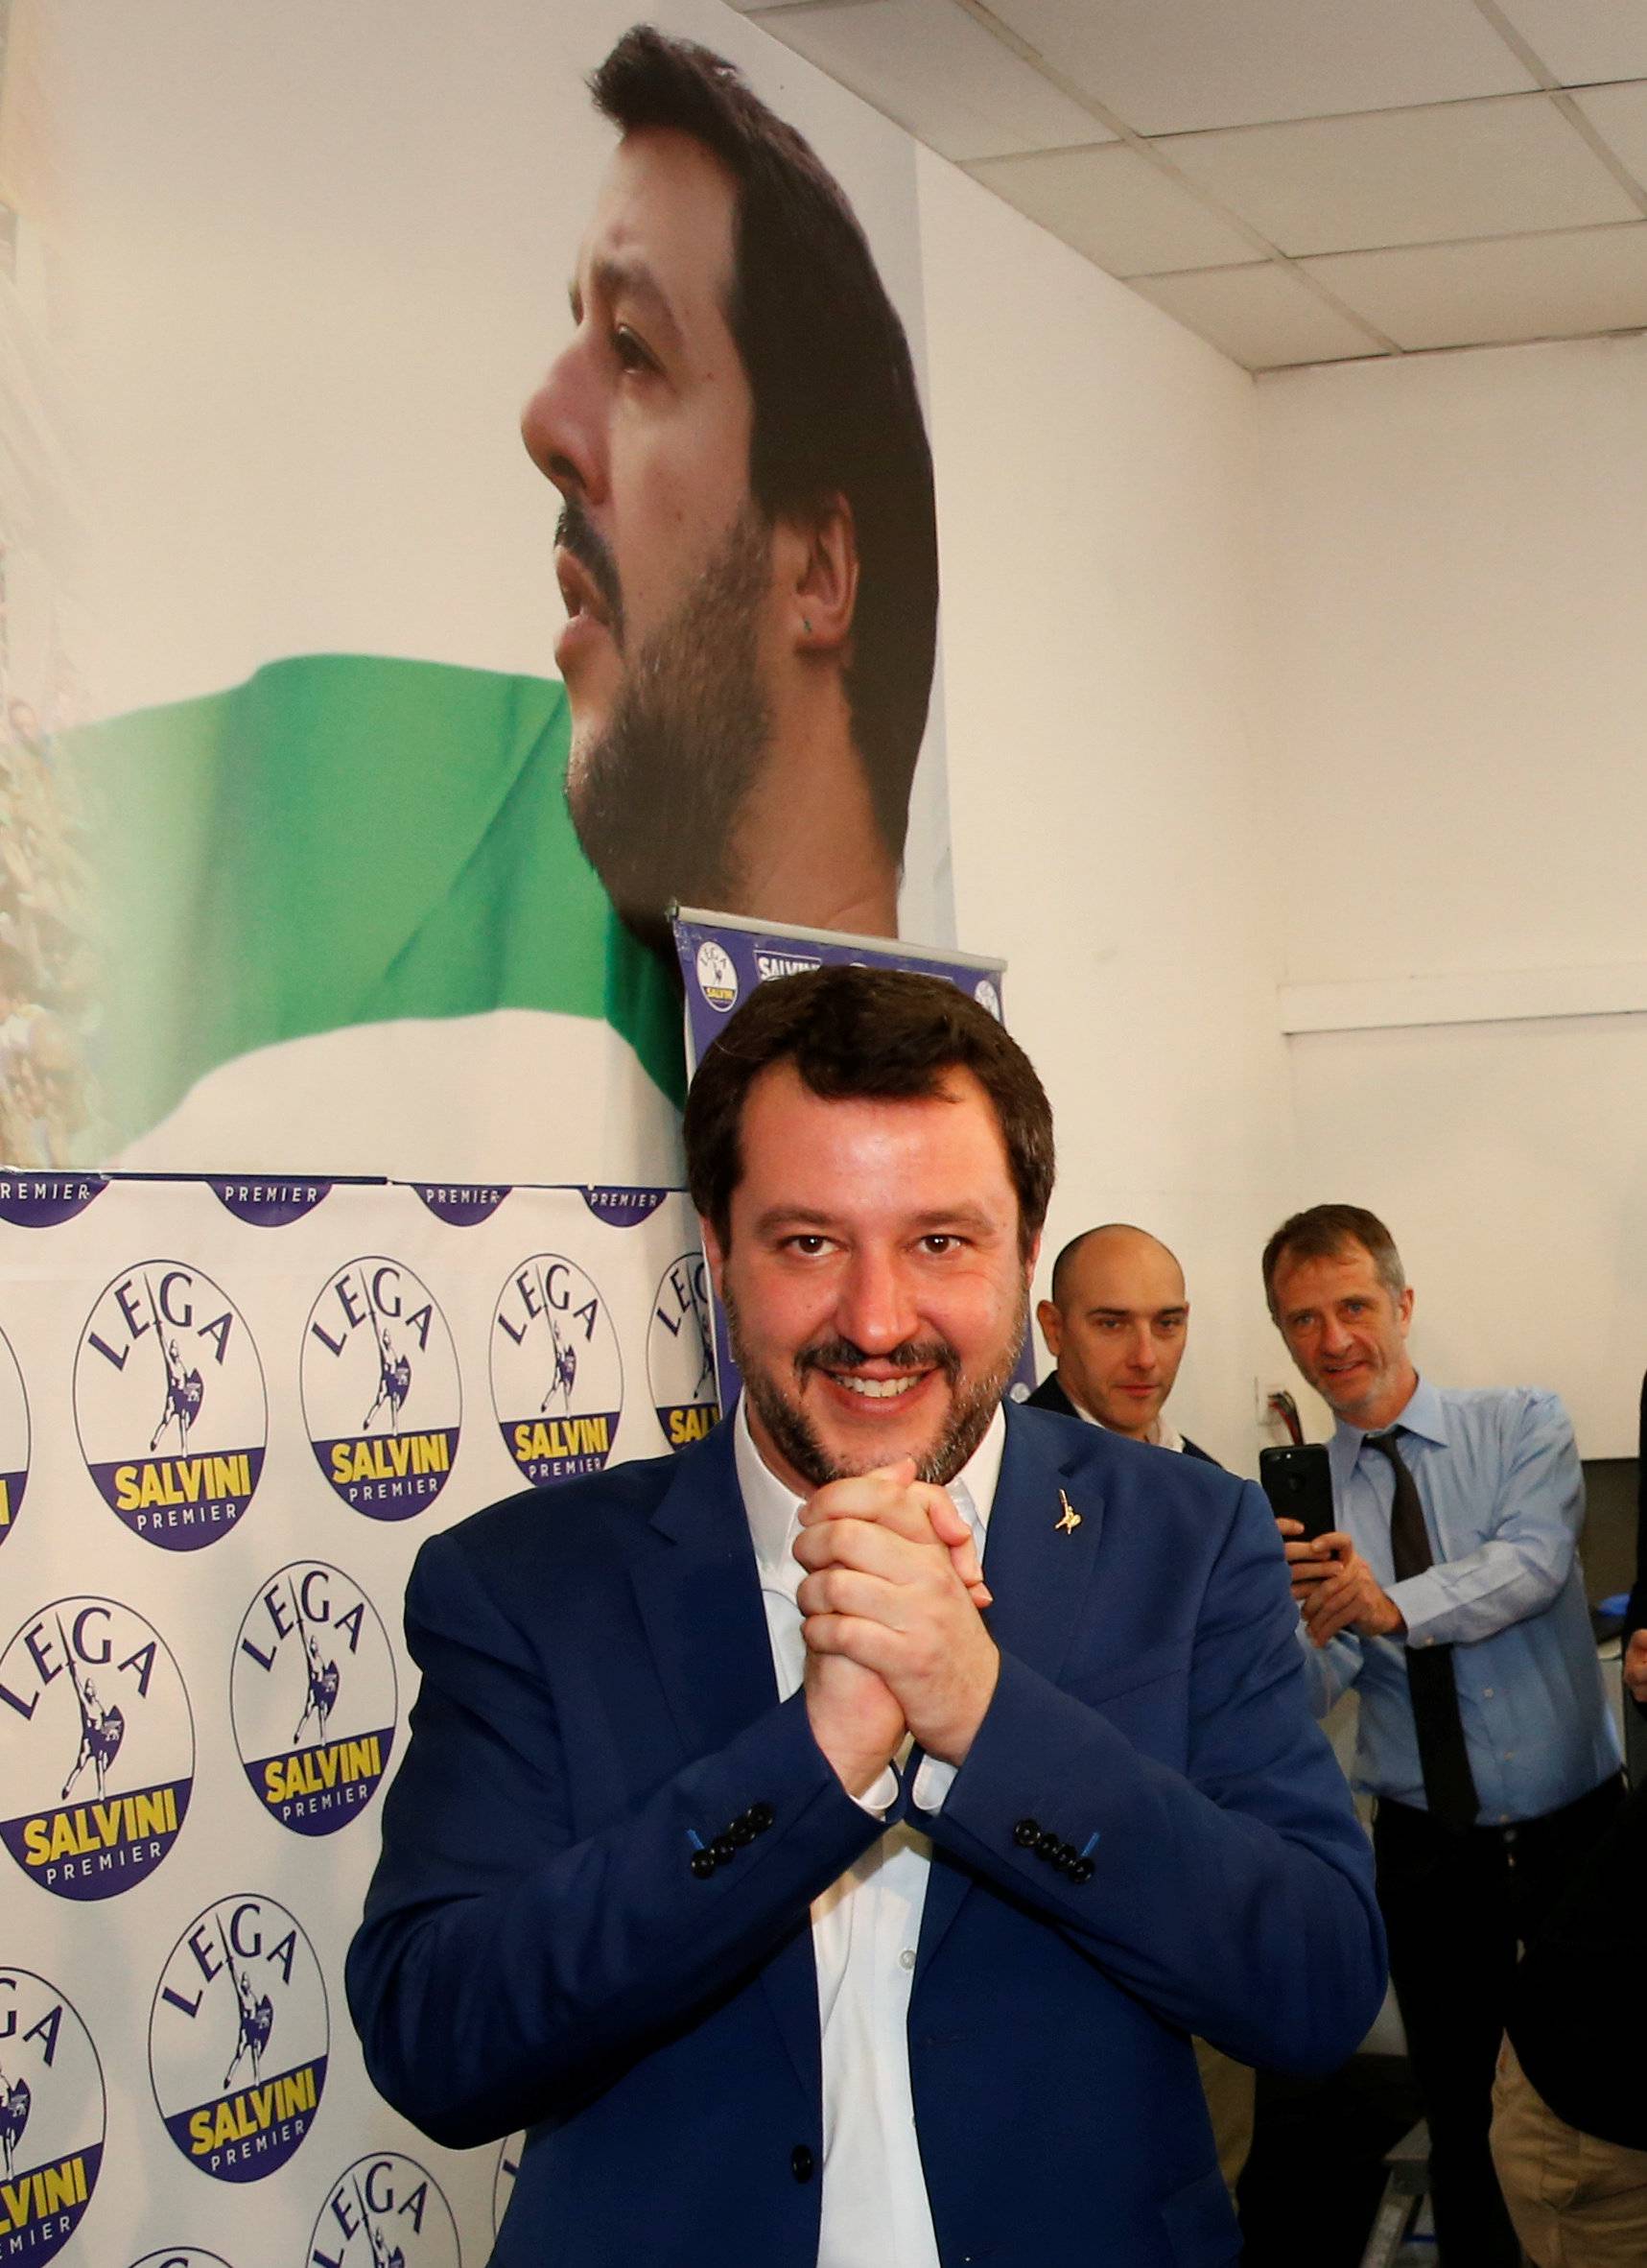 Northern League party leader Matteo Salvini poses at the end of a news conference, the day after Italy's parliamentary elections, in Milan